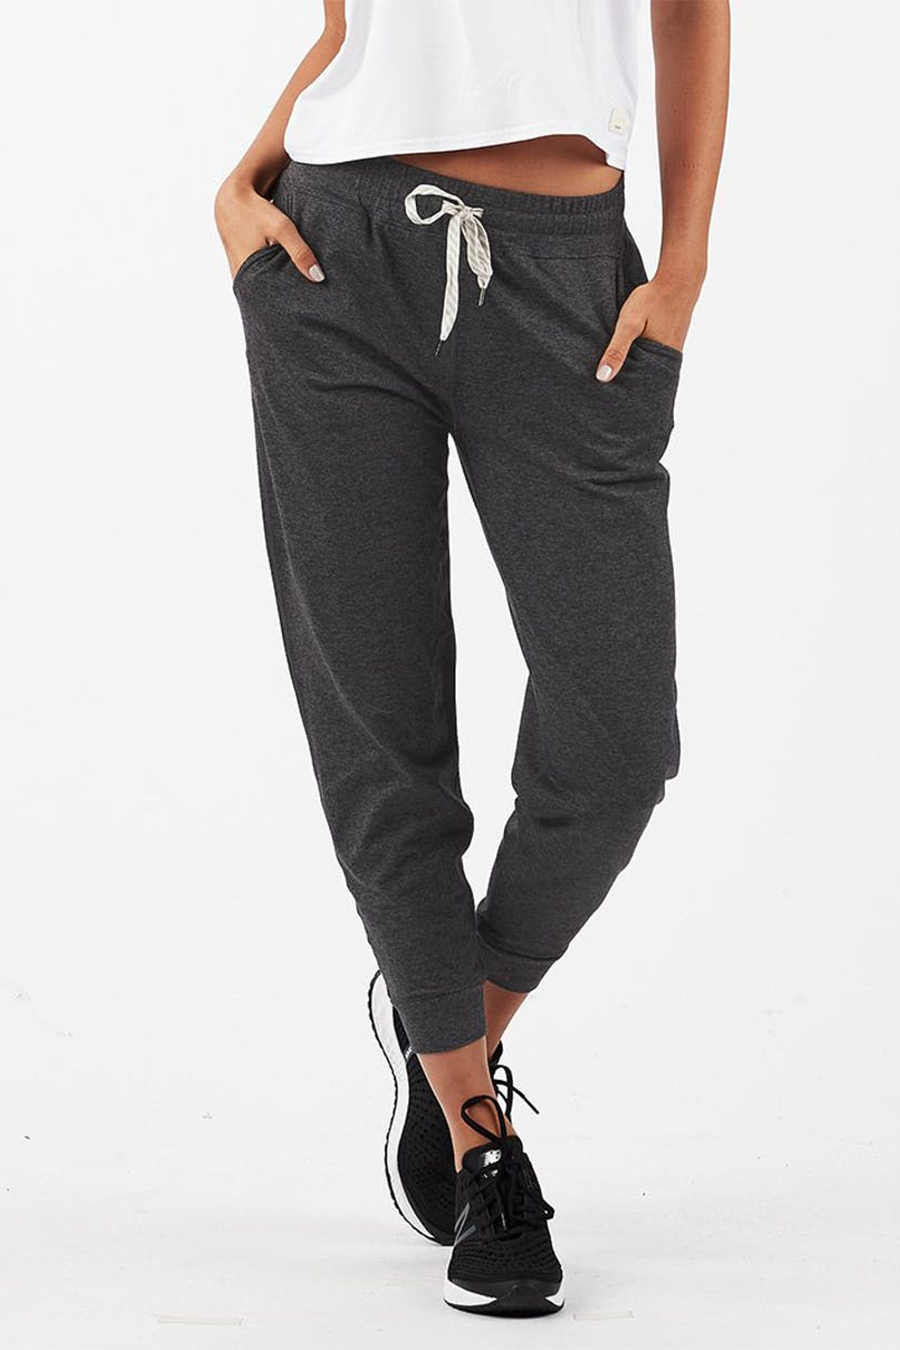 Performance Jogger | Charcoal Heather - Main Image Number 1 of 1